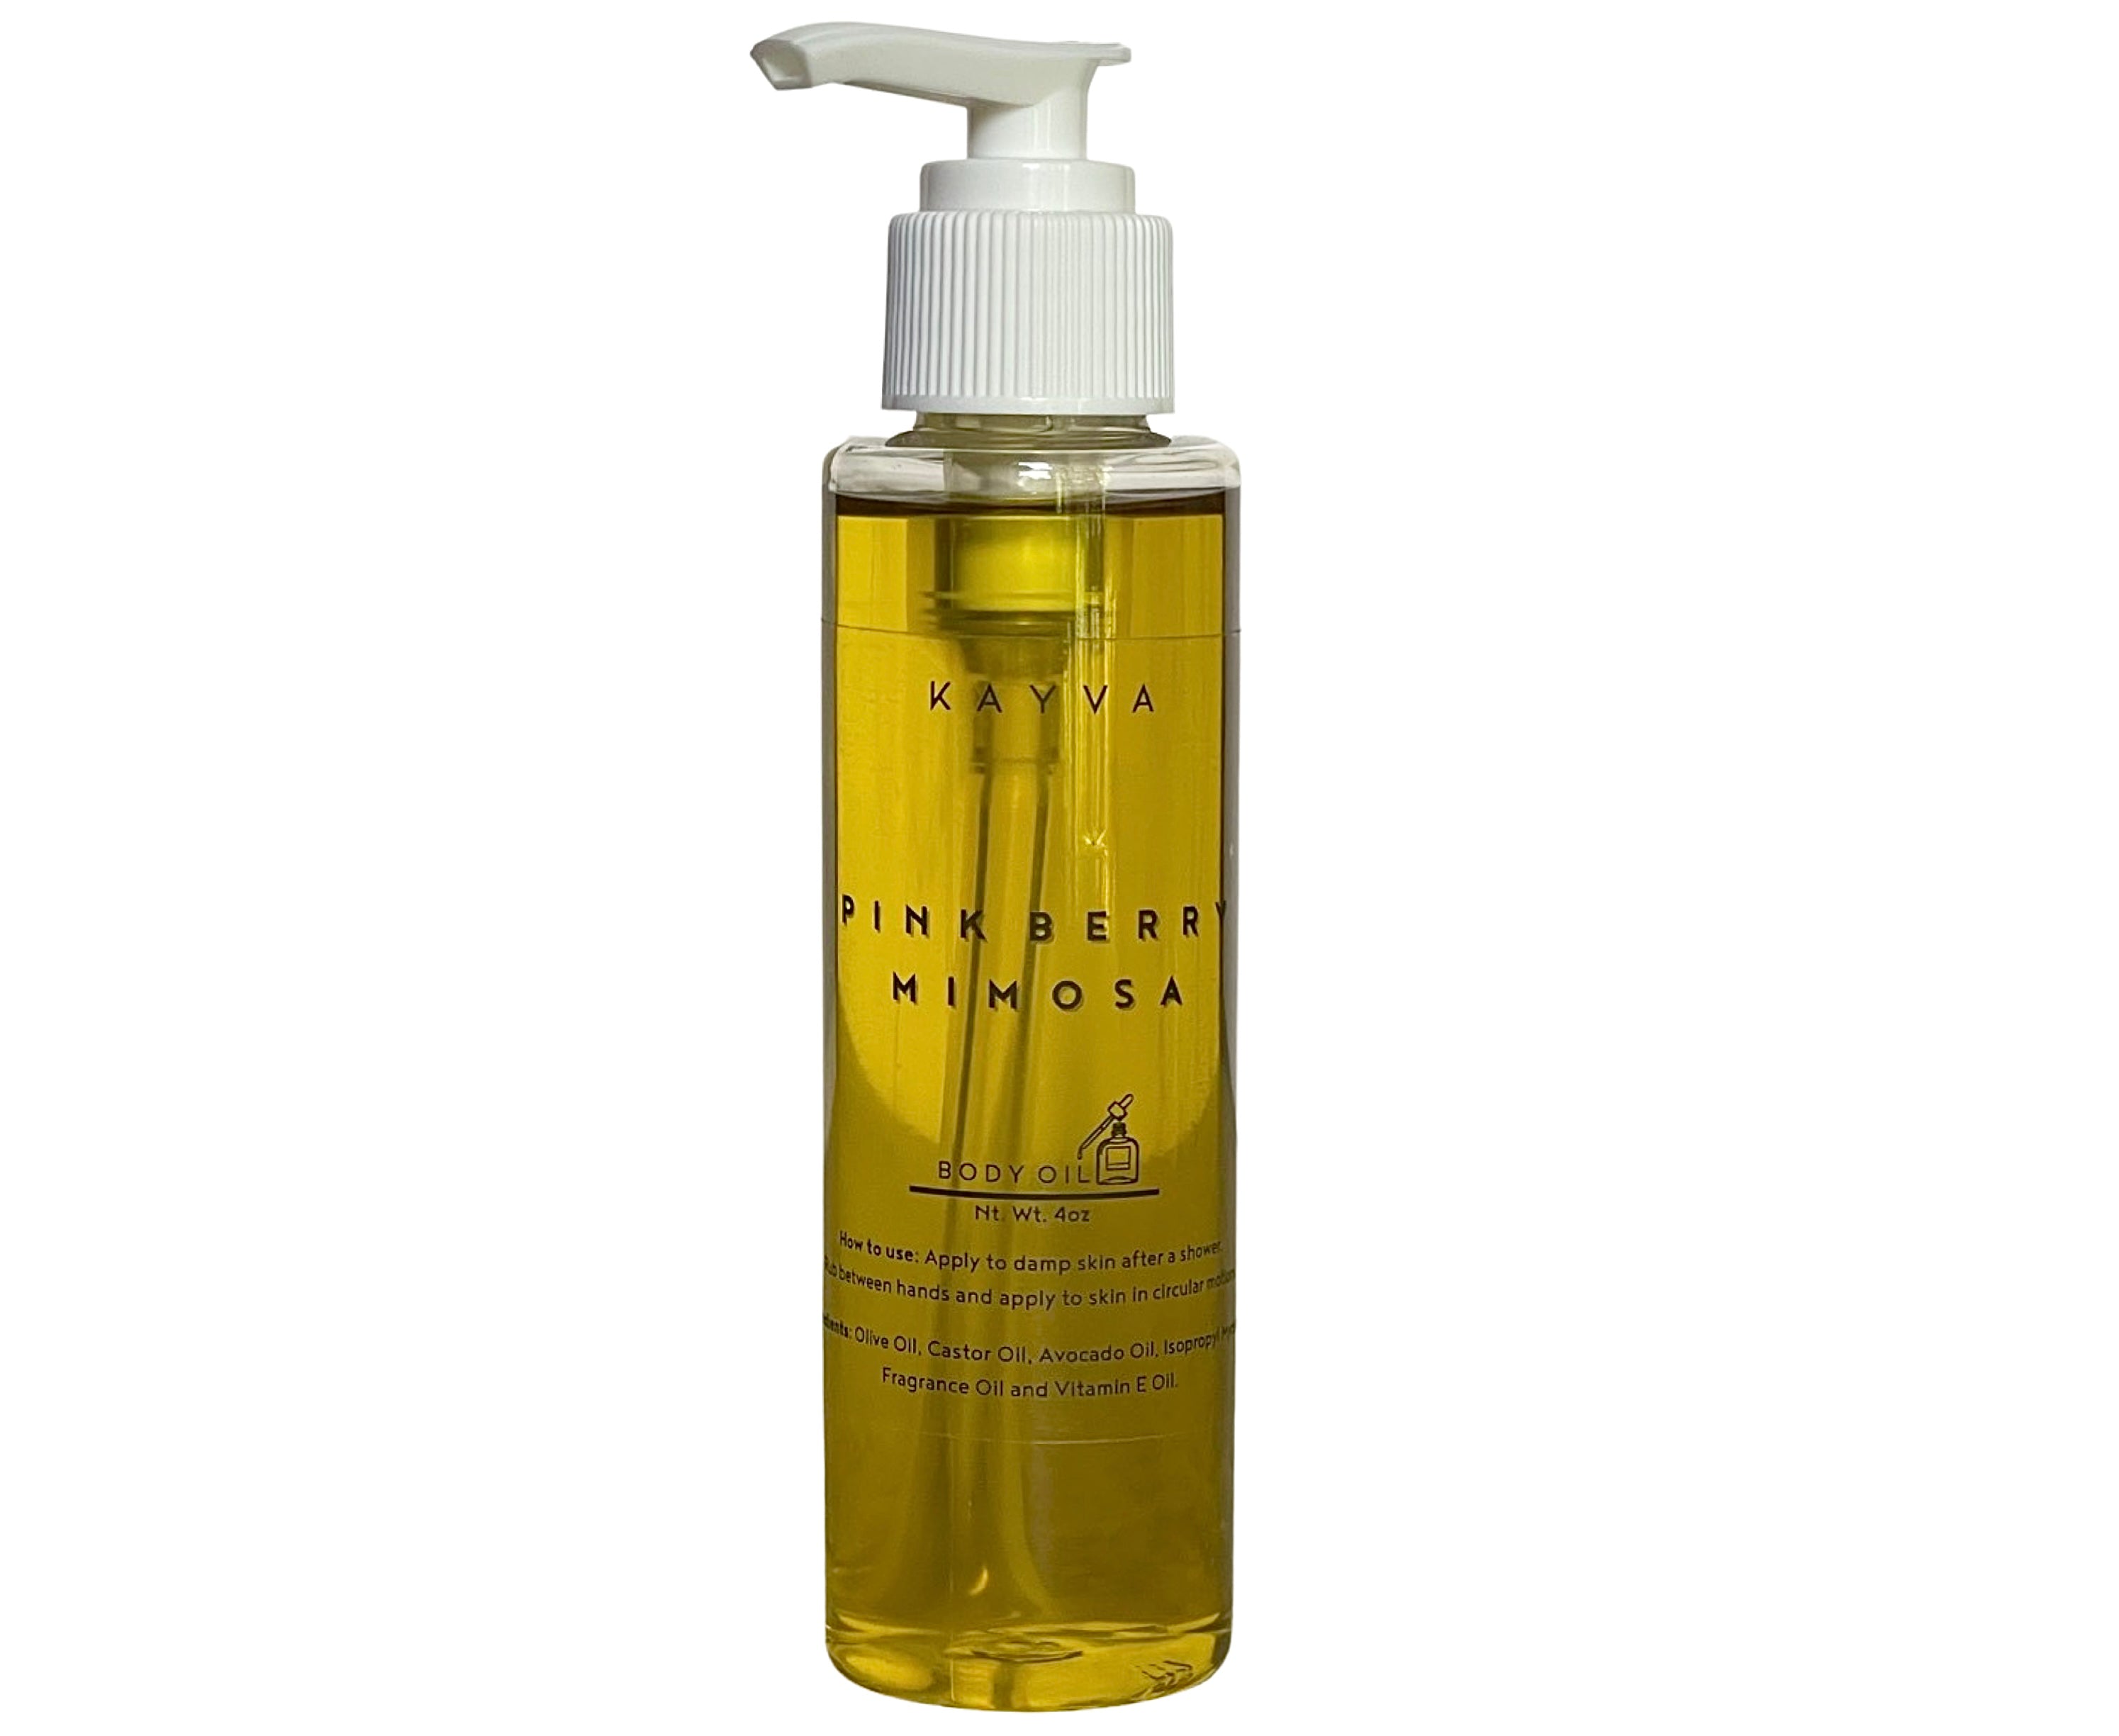 Pink Berry Mimosa Body Oil